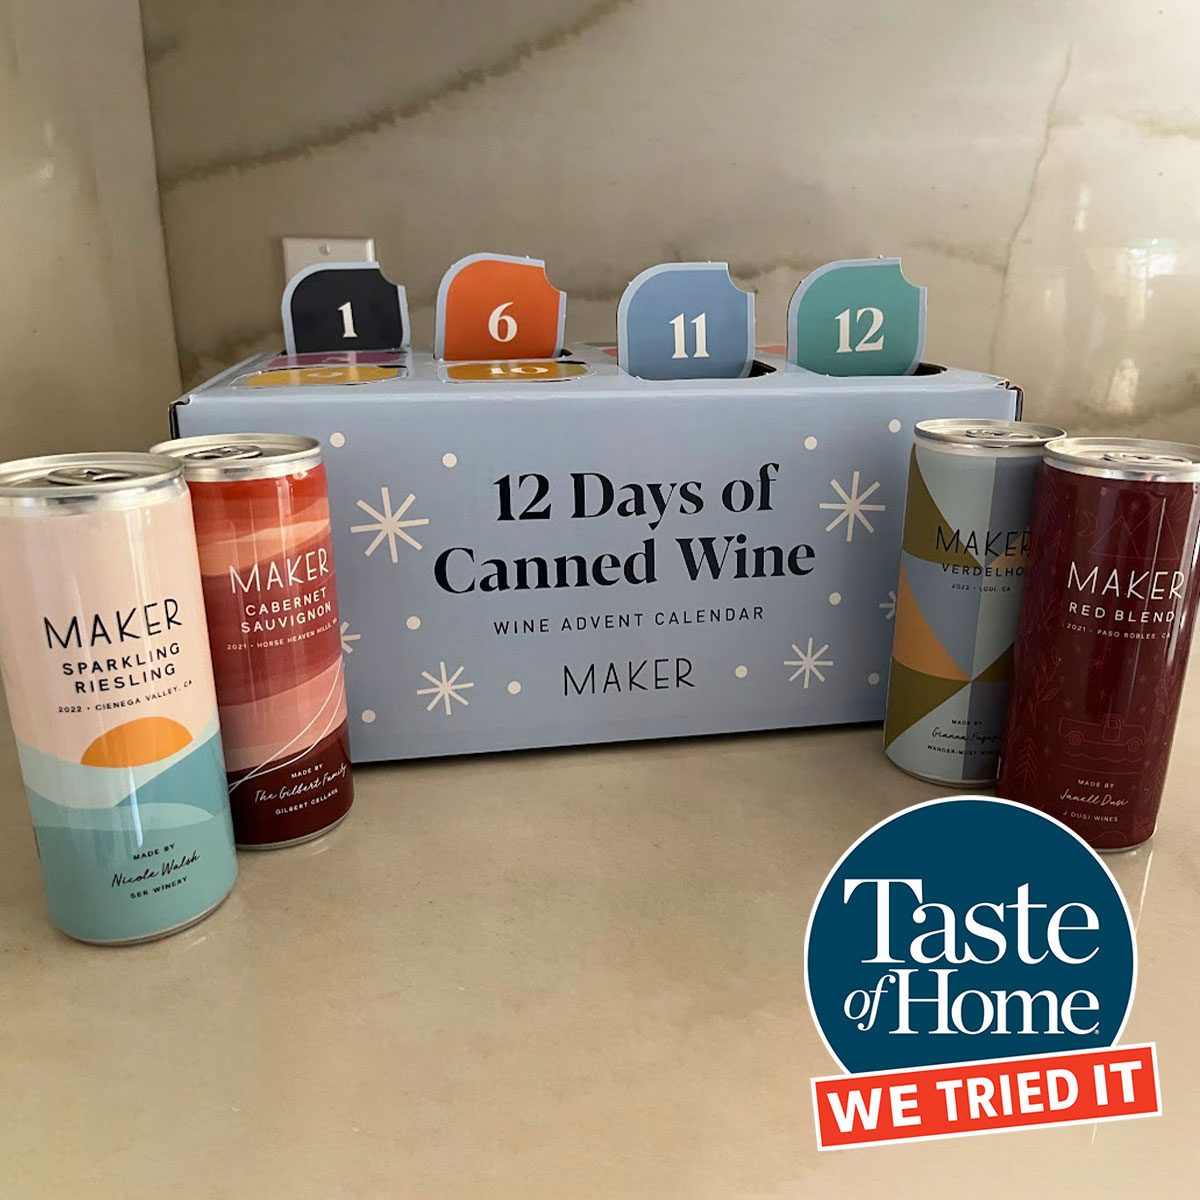  Makerwine with Canned Wine